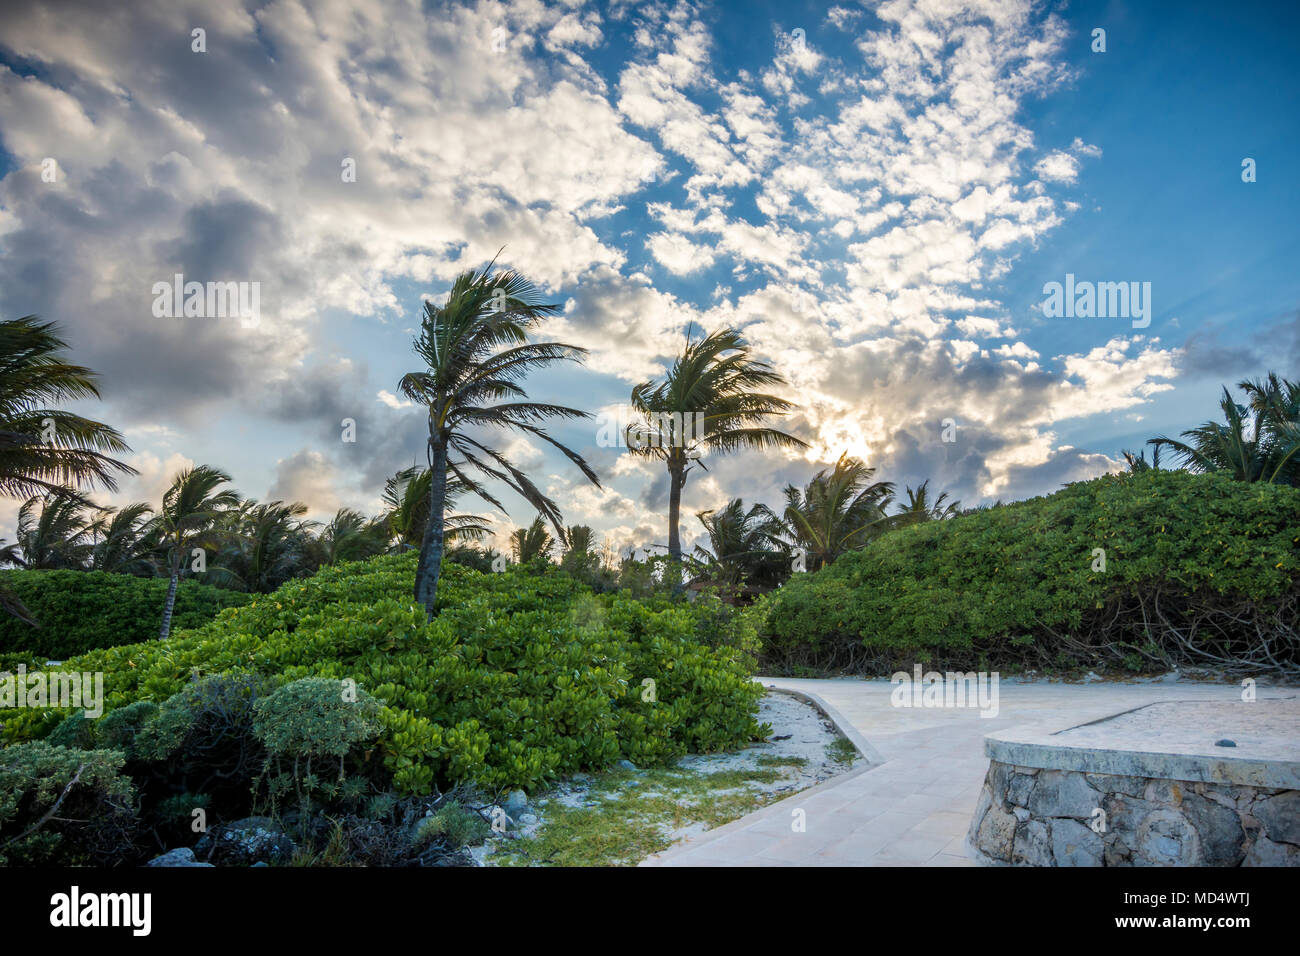 Palm trees near a tropical beach with blue skies and clouds Stock Photo